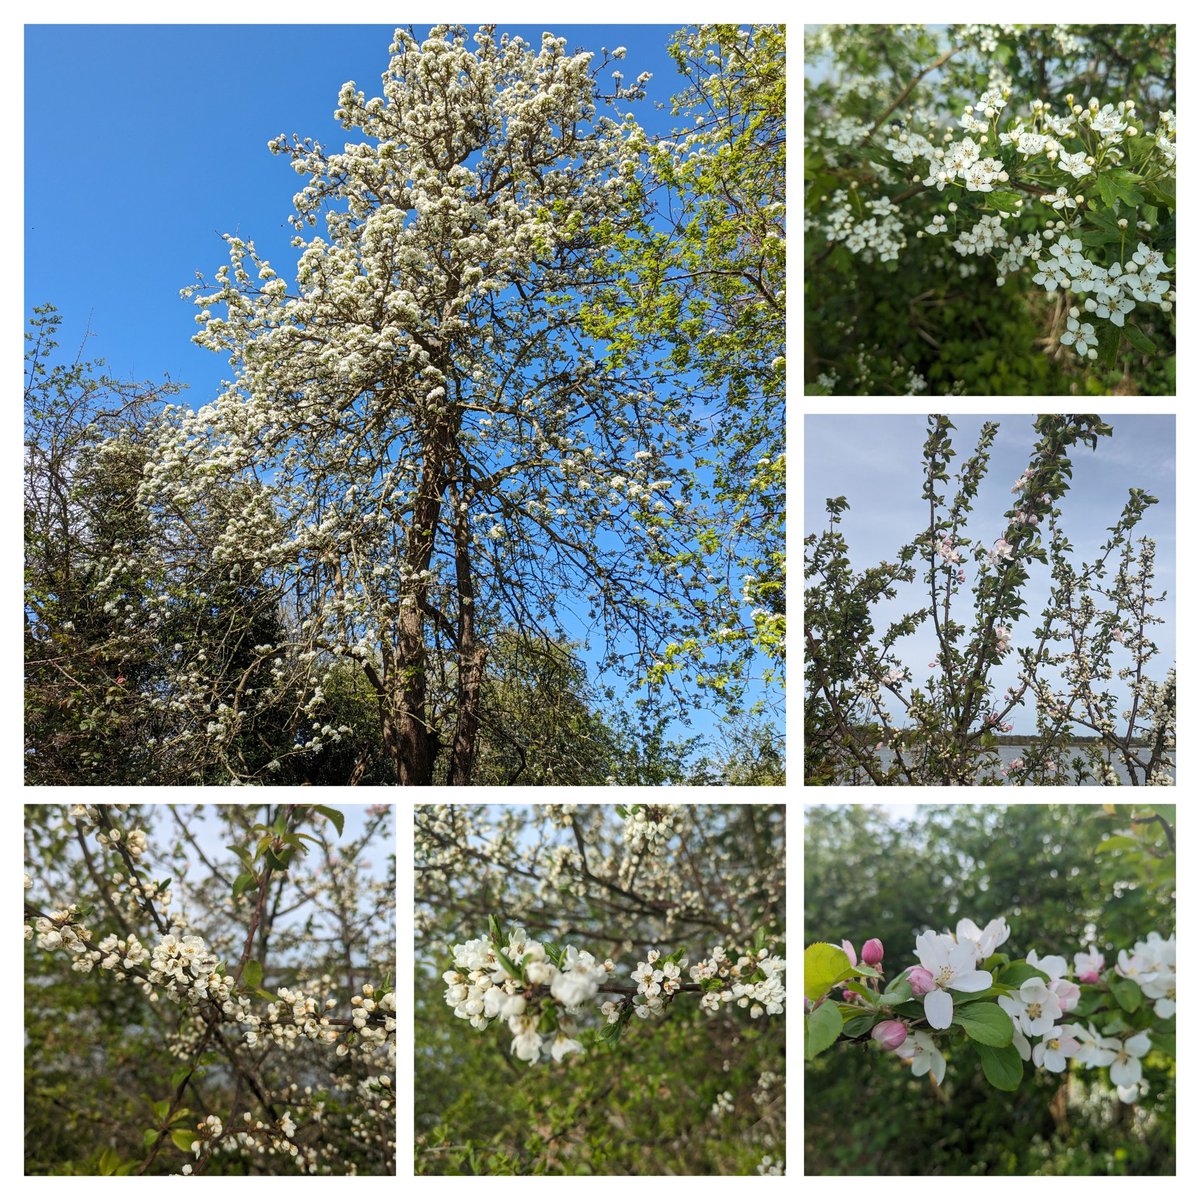 A selection of white flowers from this week around @EssexWildlife Nature reserves for #wildflowerhour #treeflowers Hawthorn, Crab apple and an ancient Pear tree in an old orchard 💮😁